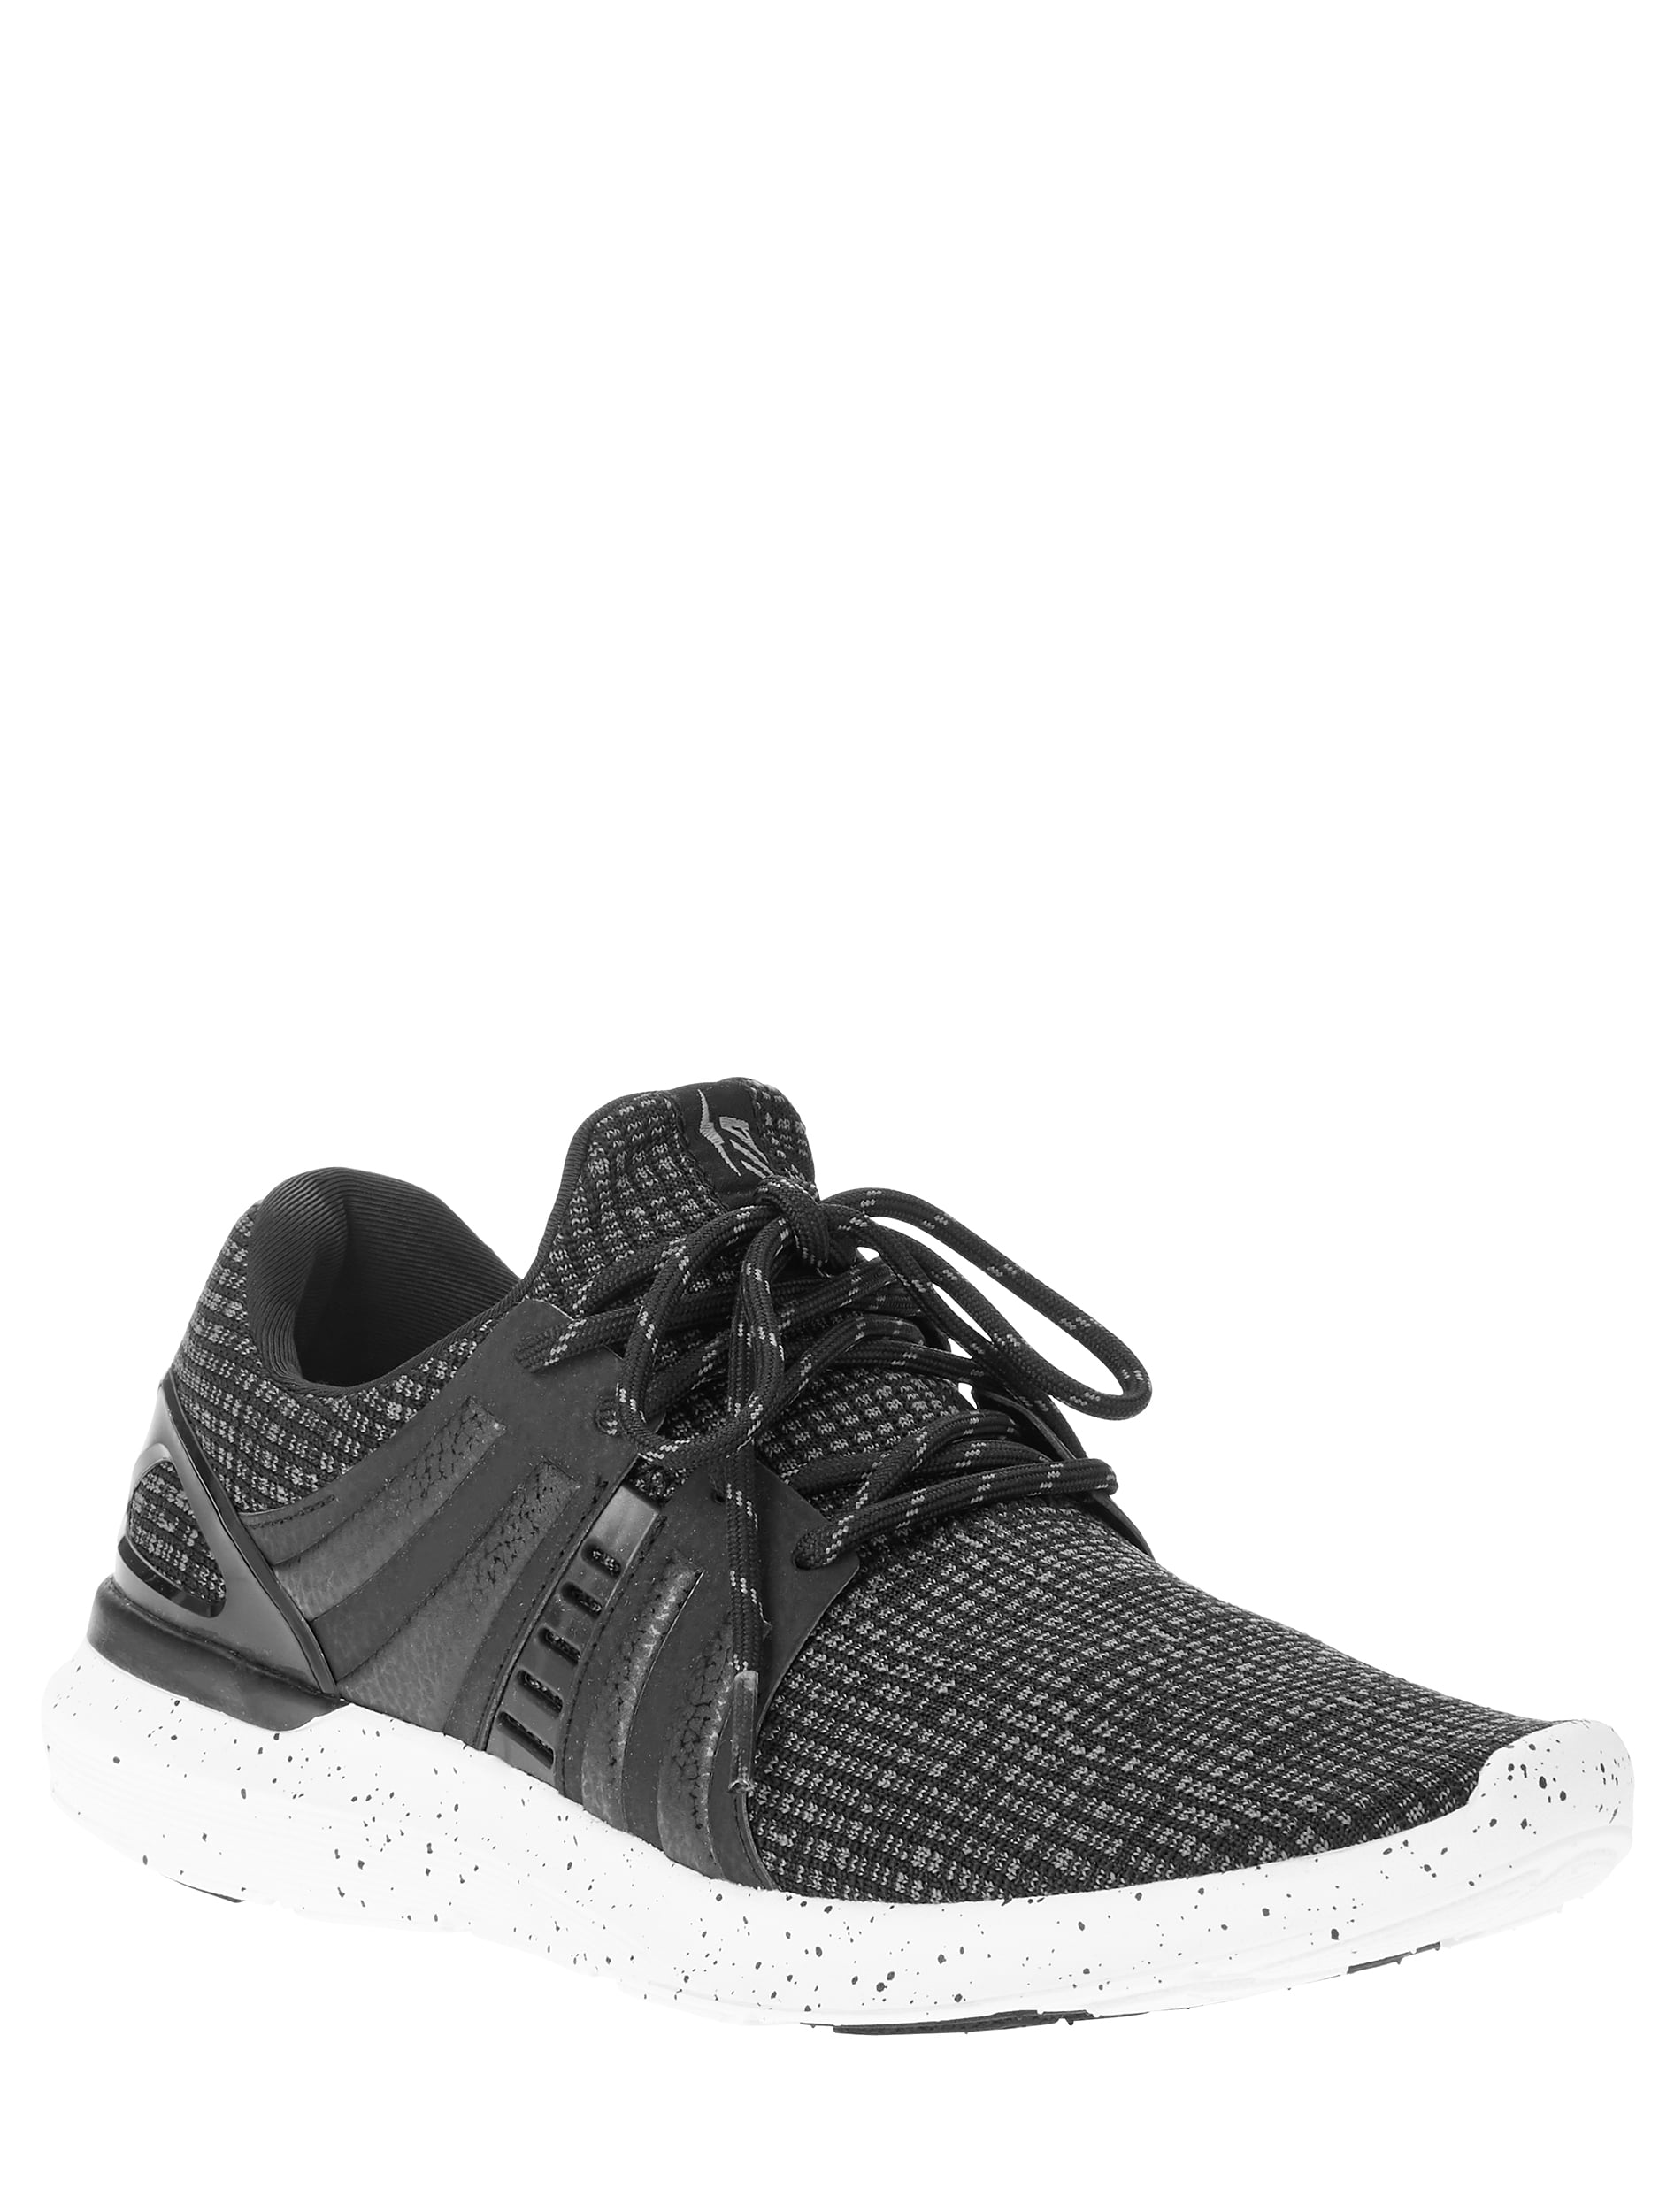 Avia Men's Caged Knit Athletic Shoes 